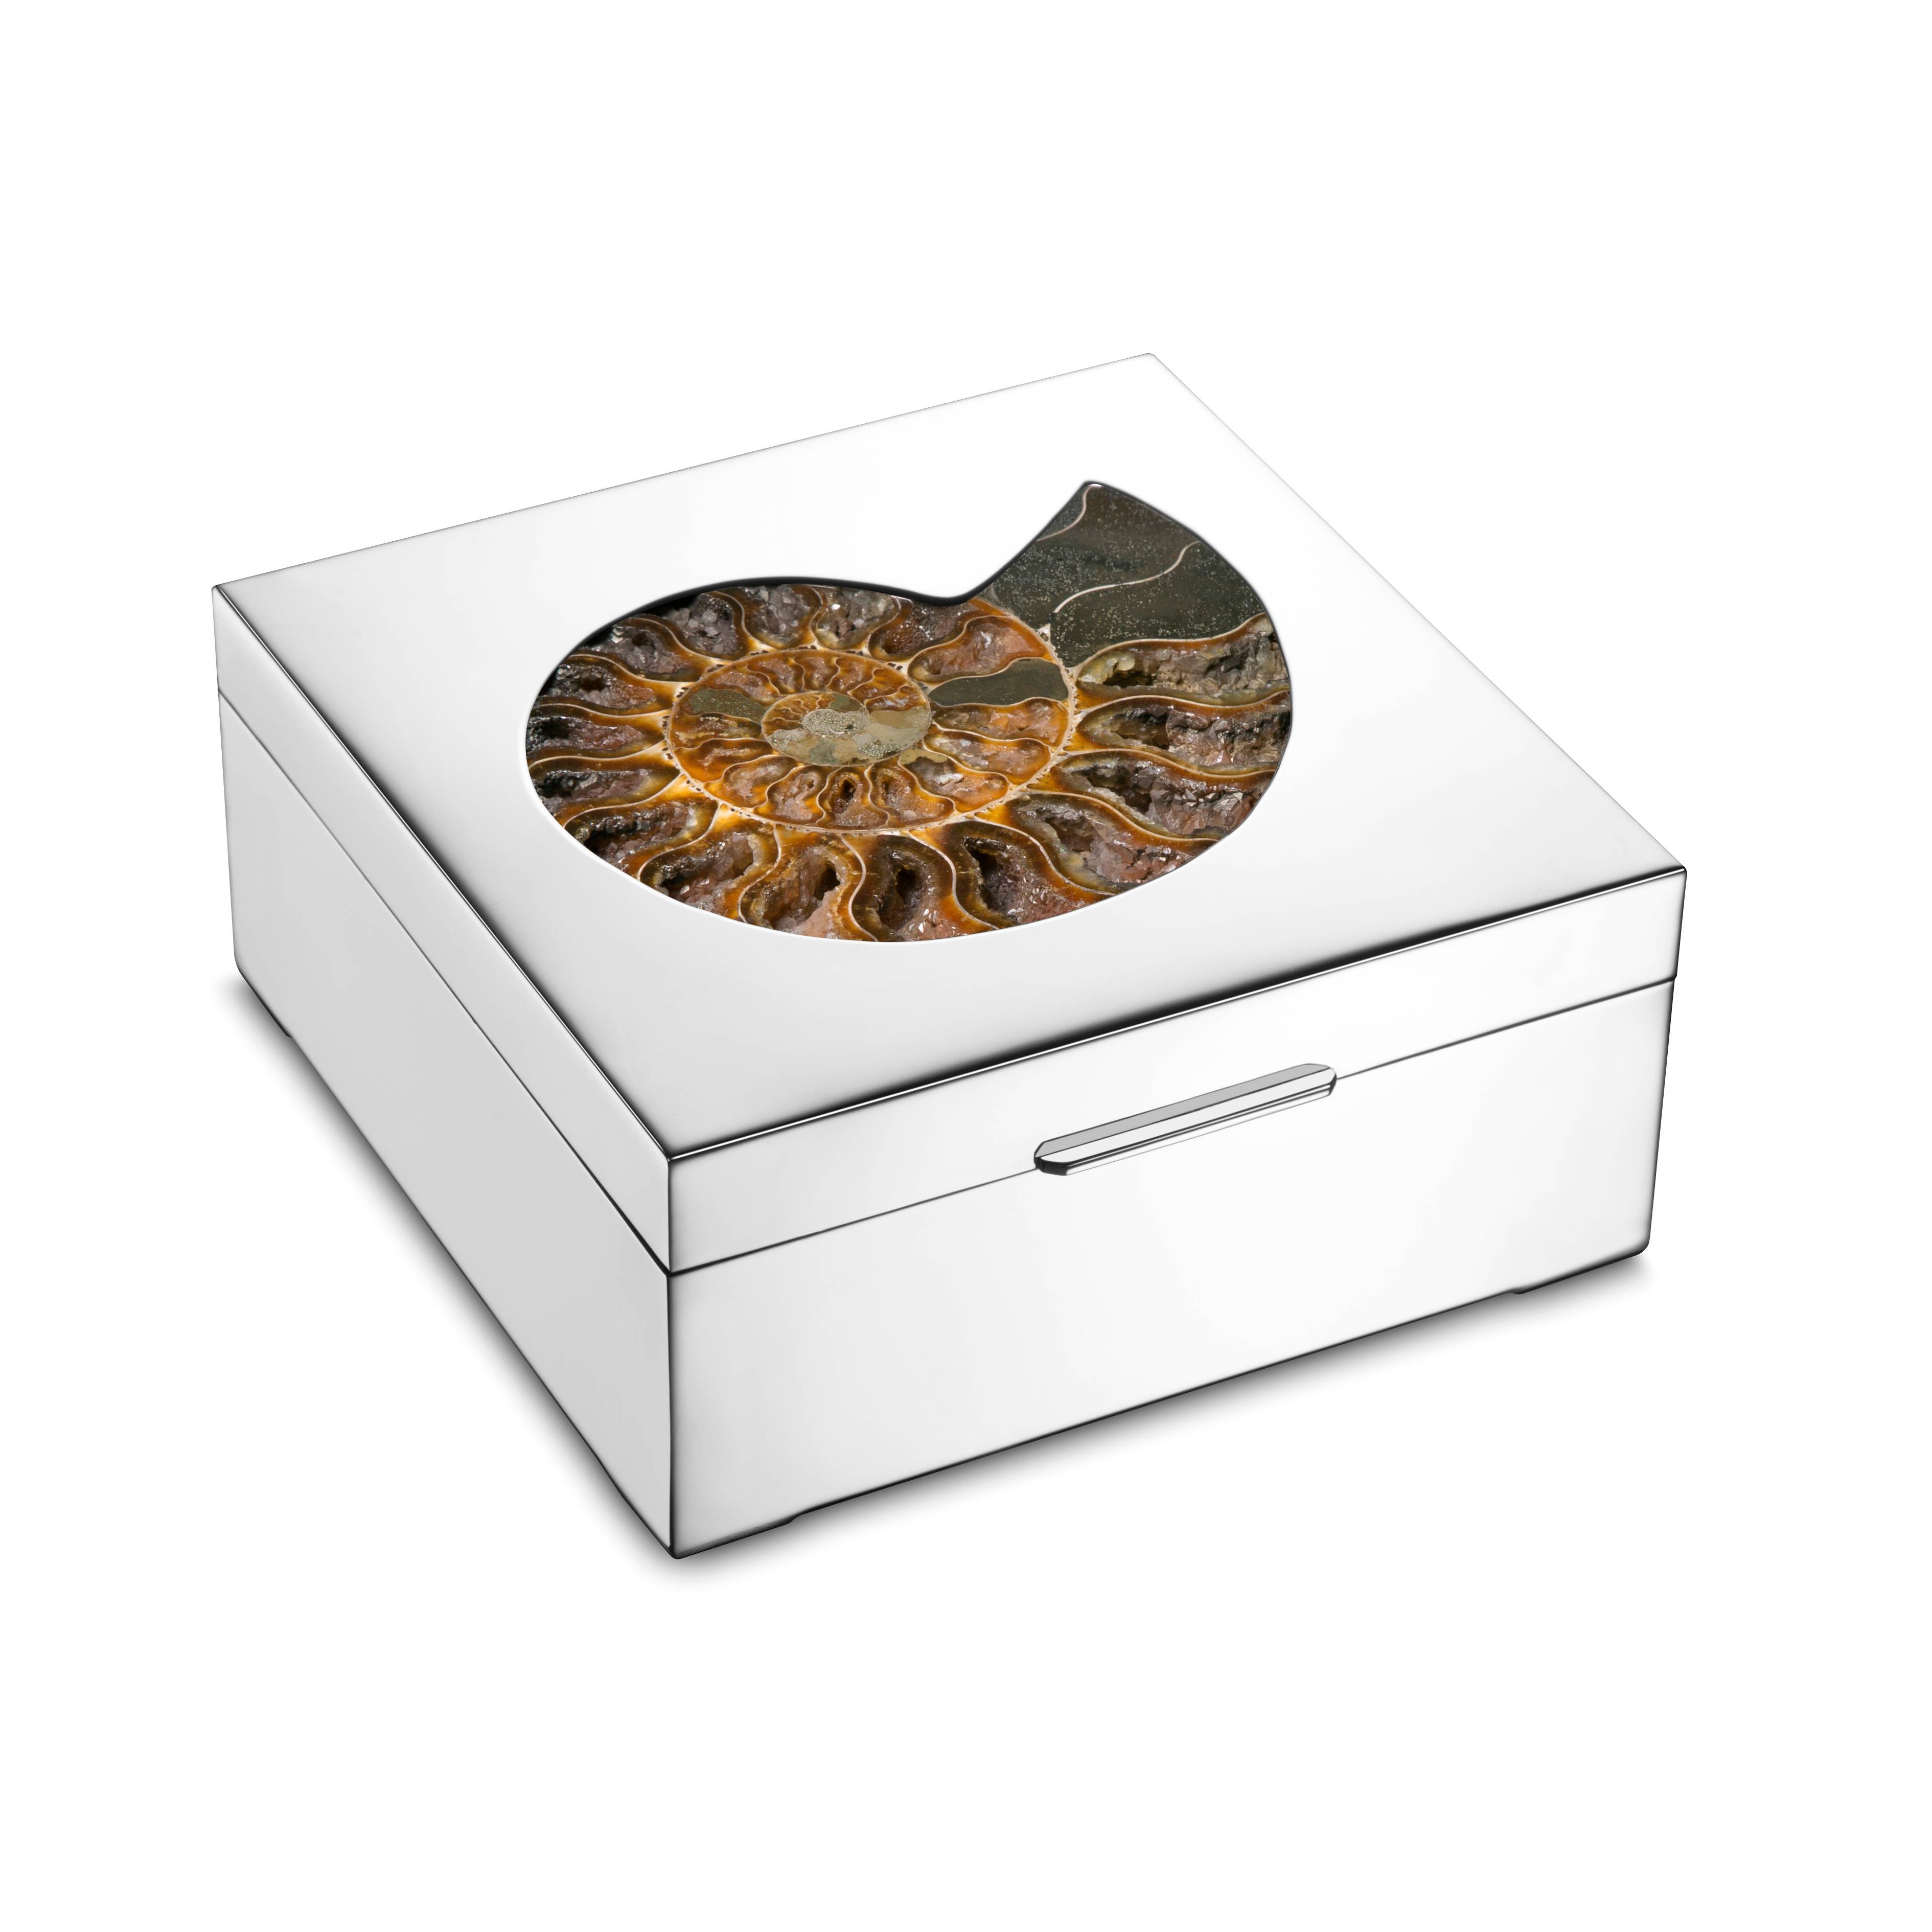 Handmade 925 sterling silver box with fossil shell (ammonite) and wooden interior